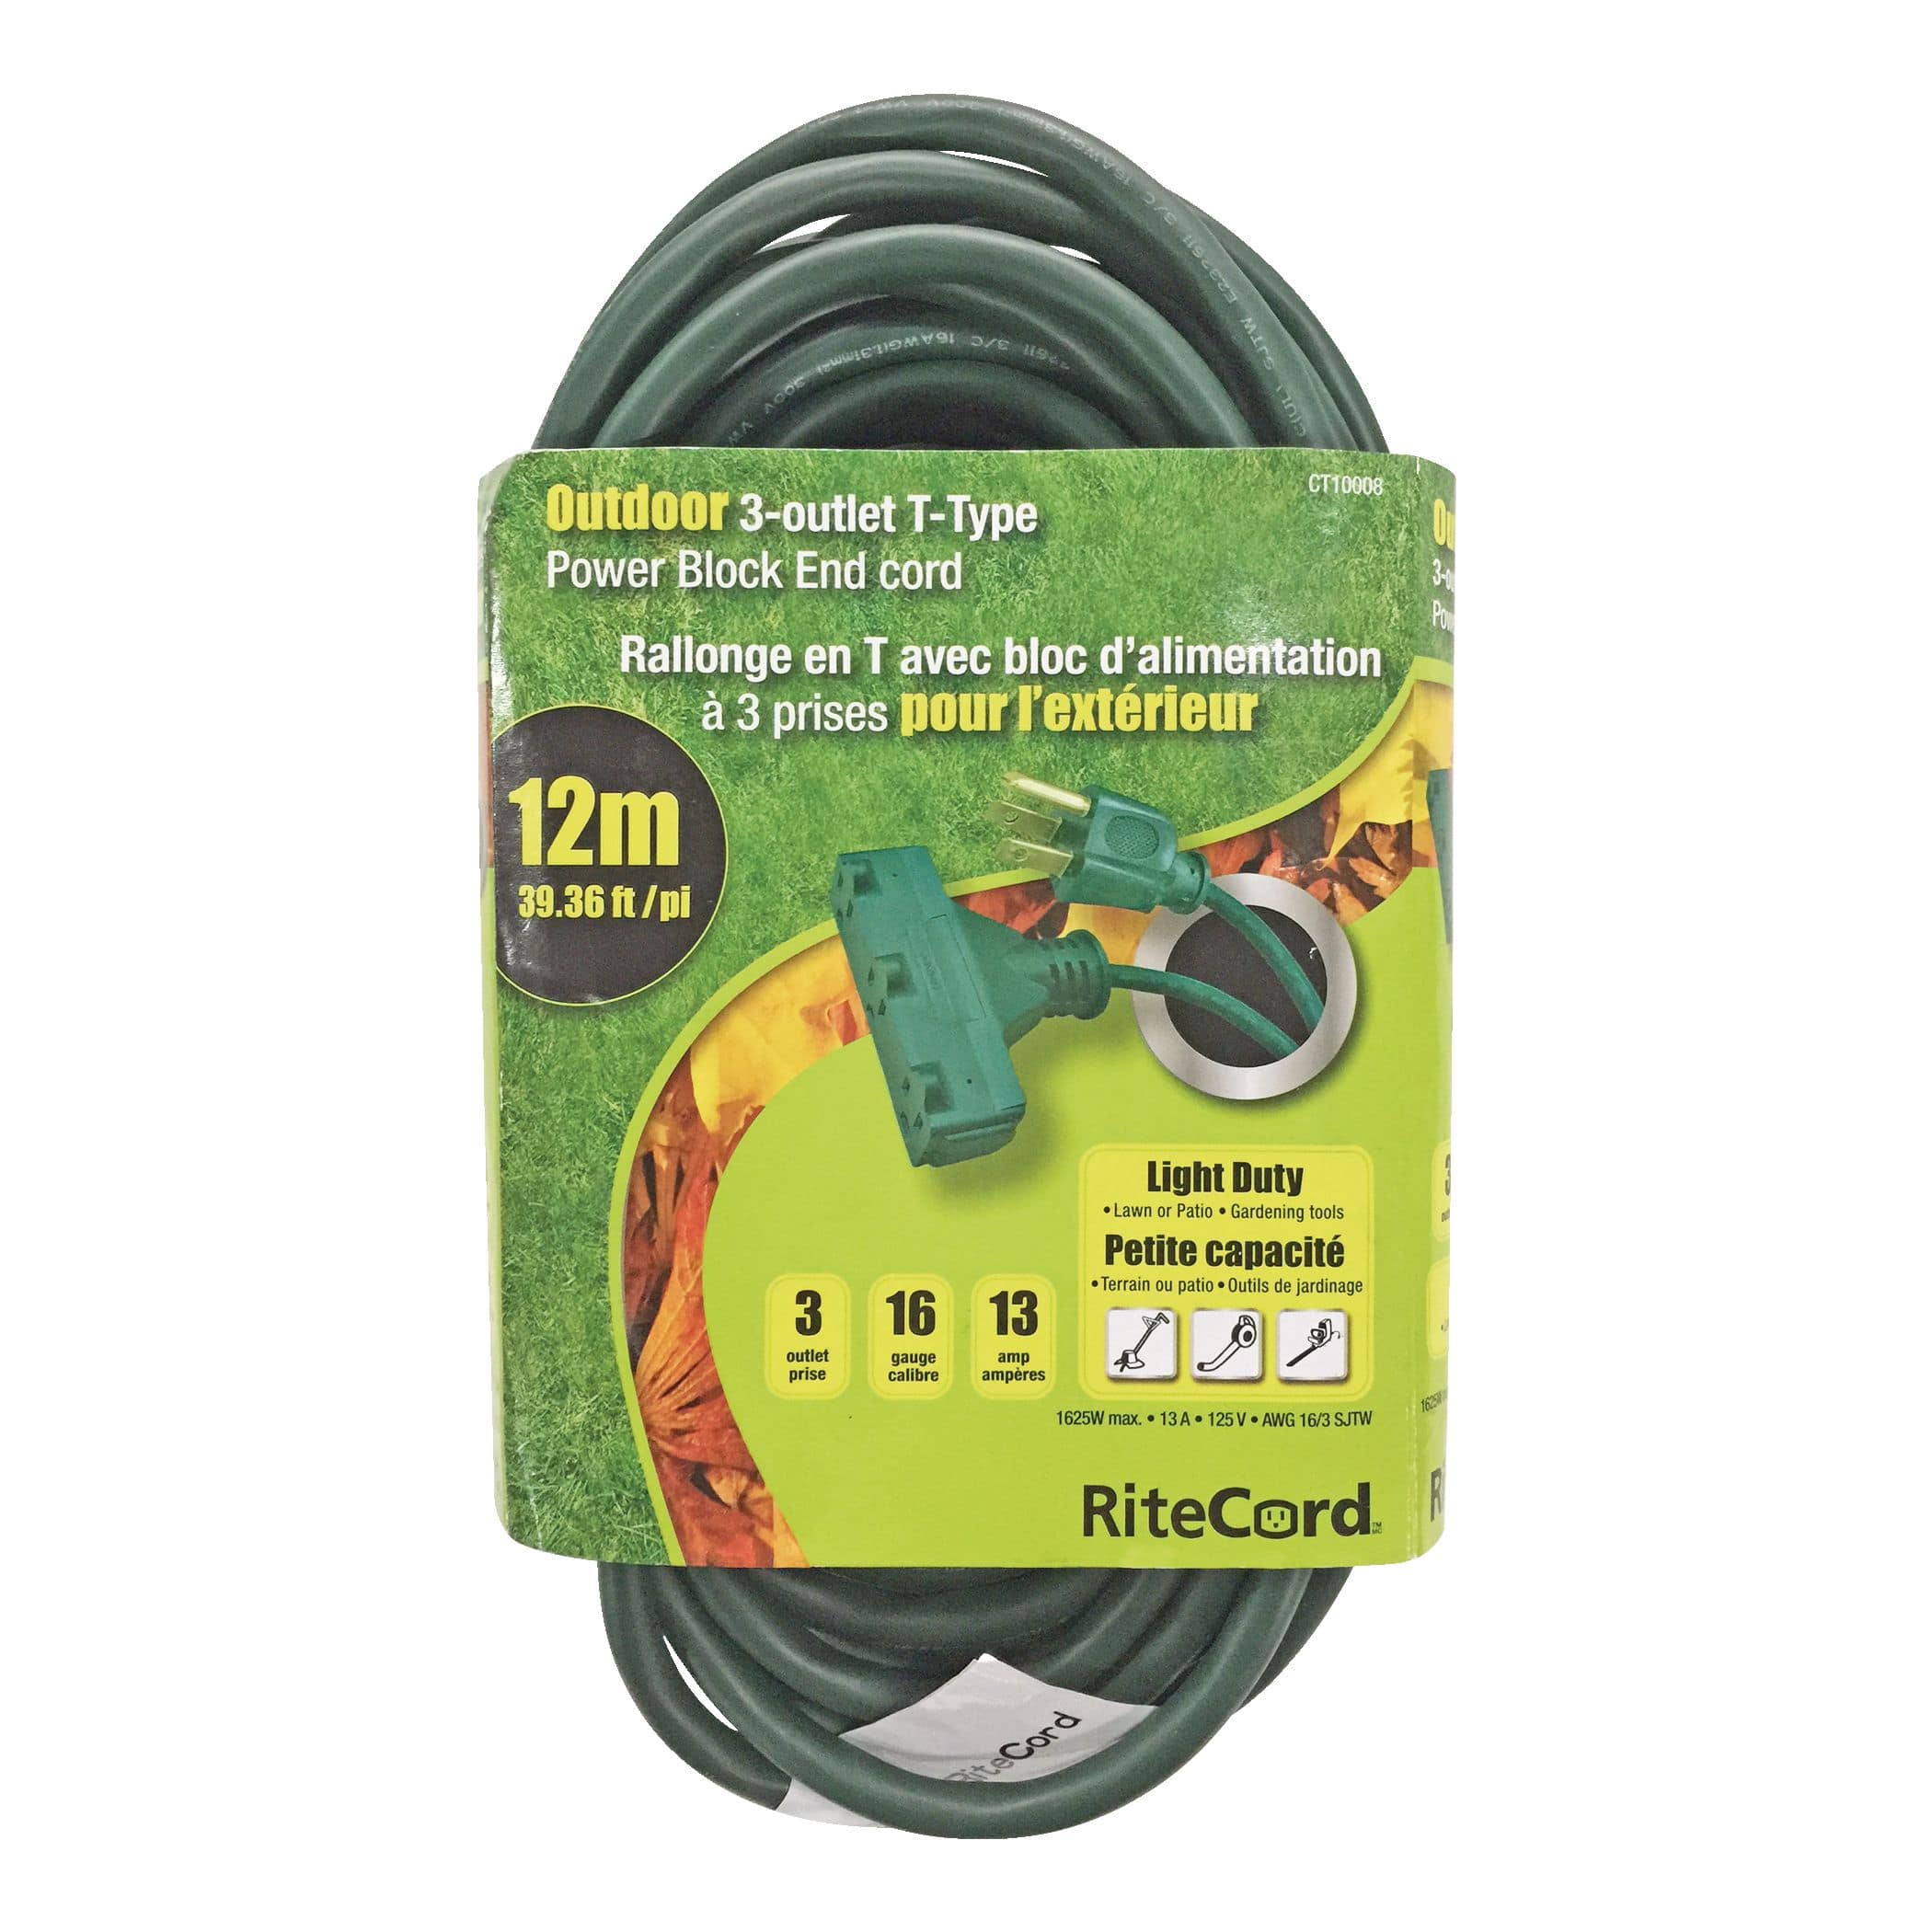 https://media-www.canadiantire.ca/product/fixing/electrical/power-bars-extension-cords-timers/2993886/12m-3-outlet-green-outdoor-cord-0394fc1c-40eb-4e78-8453-3aaece71993a-jpgrendition.jpg